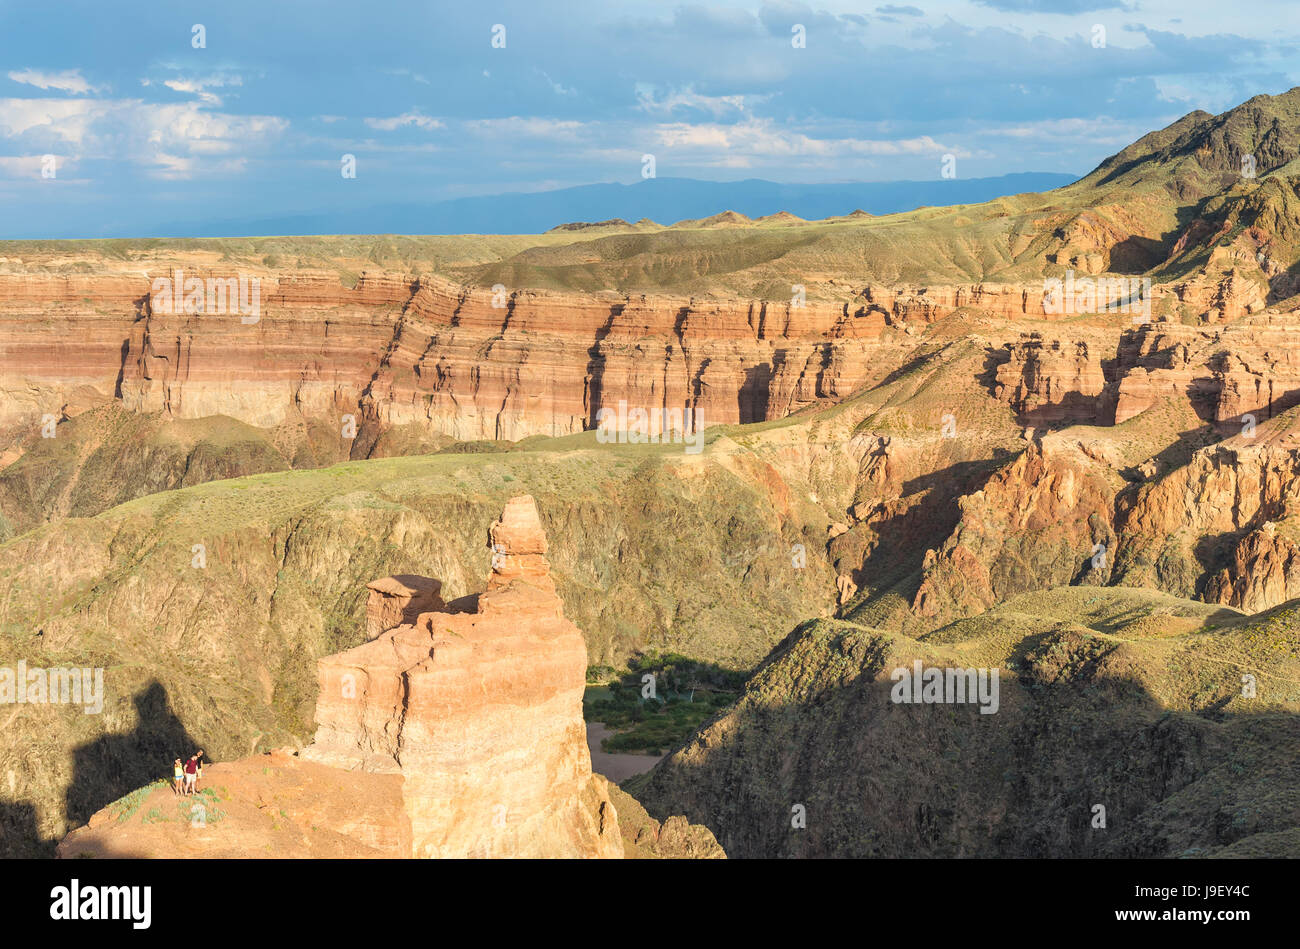 Sharyn Canyon National Park and the Valley of Castles, Tien Shan Mountains, Kazakhstan Stock Photo